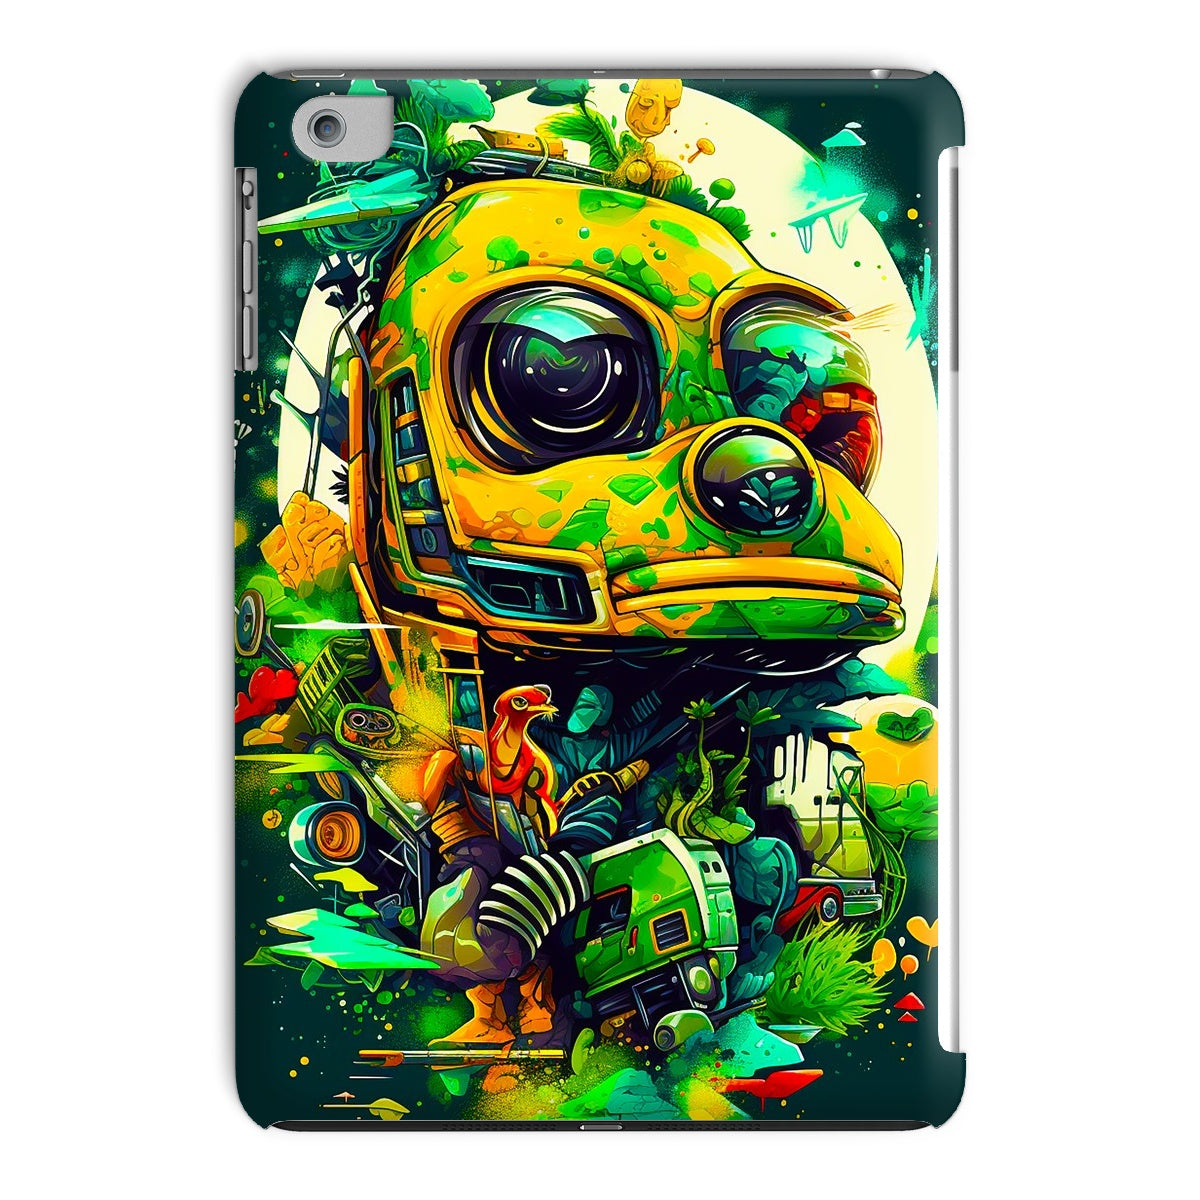 Mechanical Muse: Vibrant Graffiti Odyssey in Surreal Auto Wonderland Tablet Cases